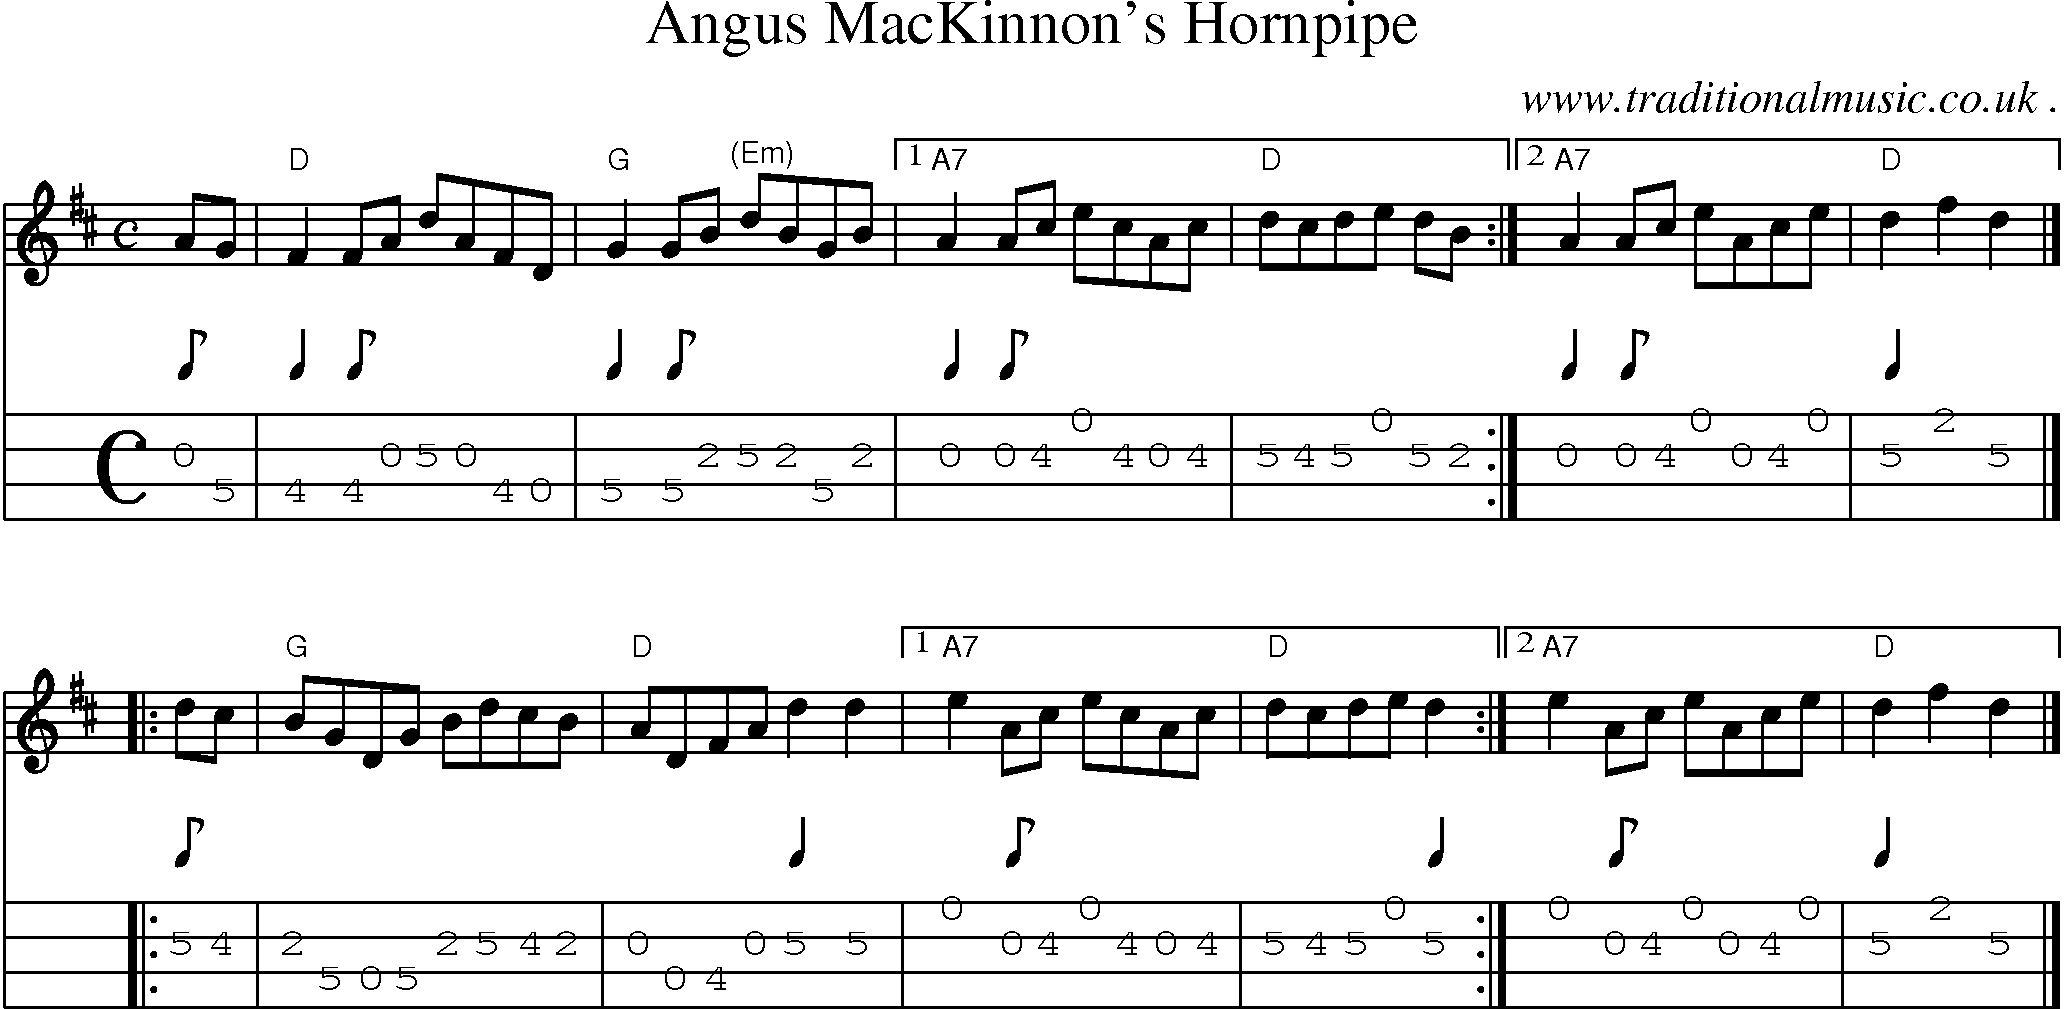 Sheet-music  score, Chords and Mandolin Tabs for Angus Mackinnons Hornpipe